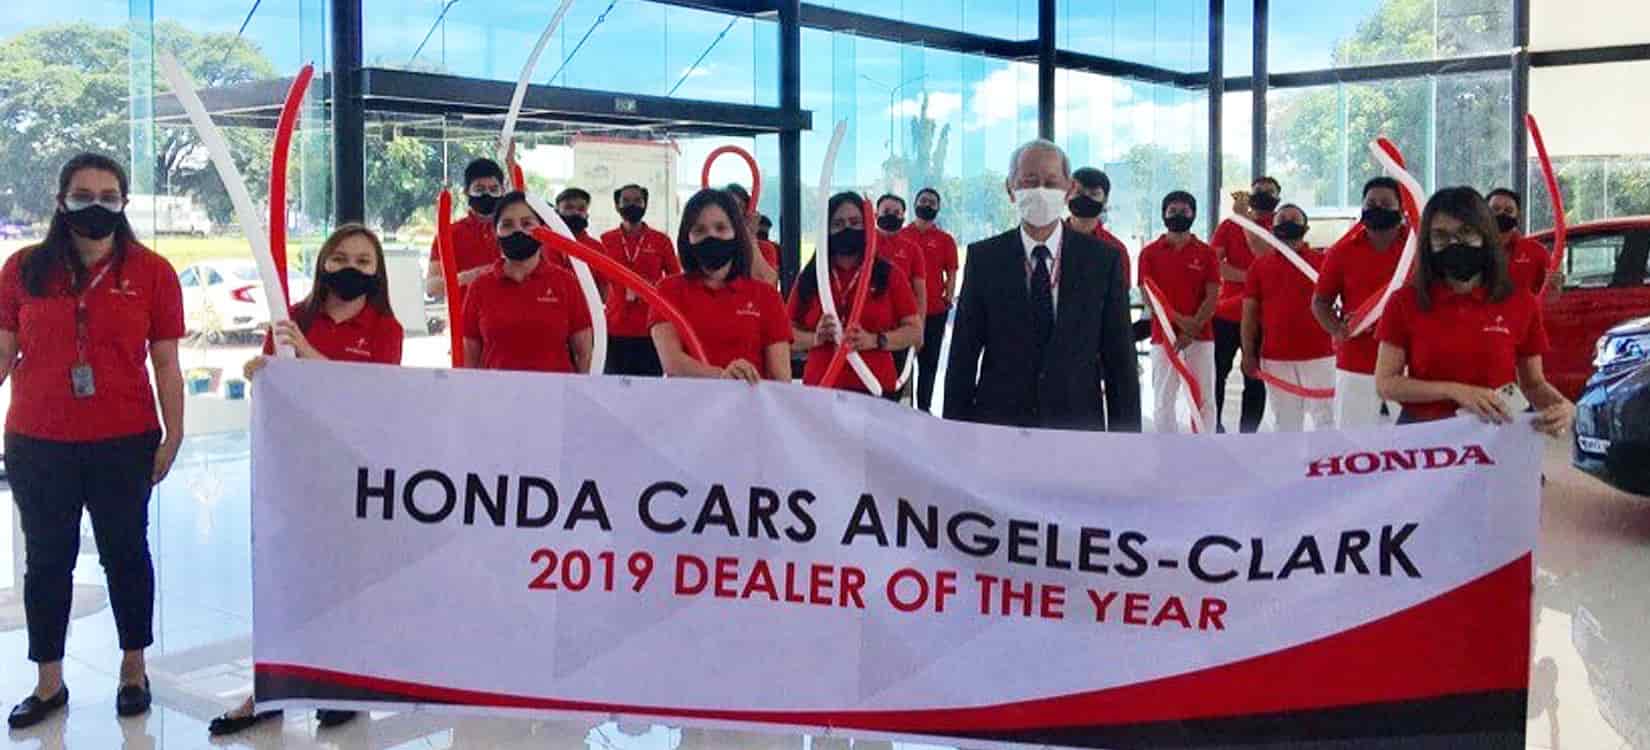 Dealer of the Year